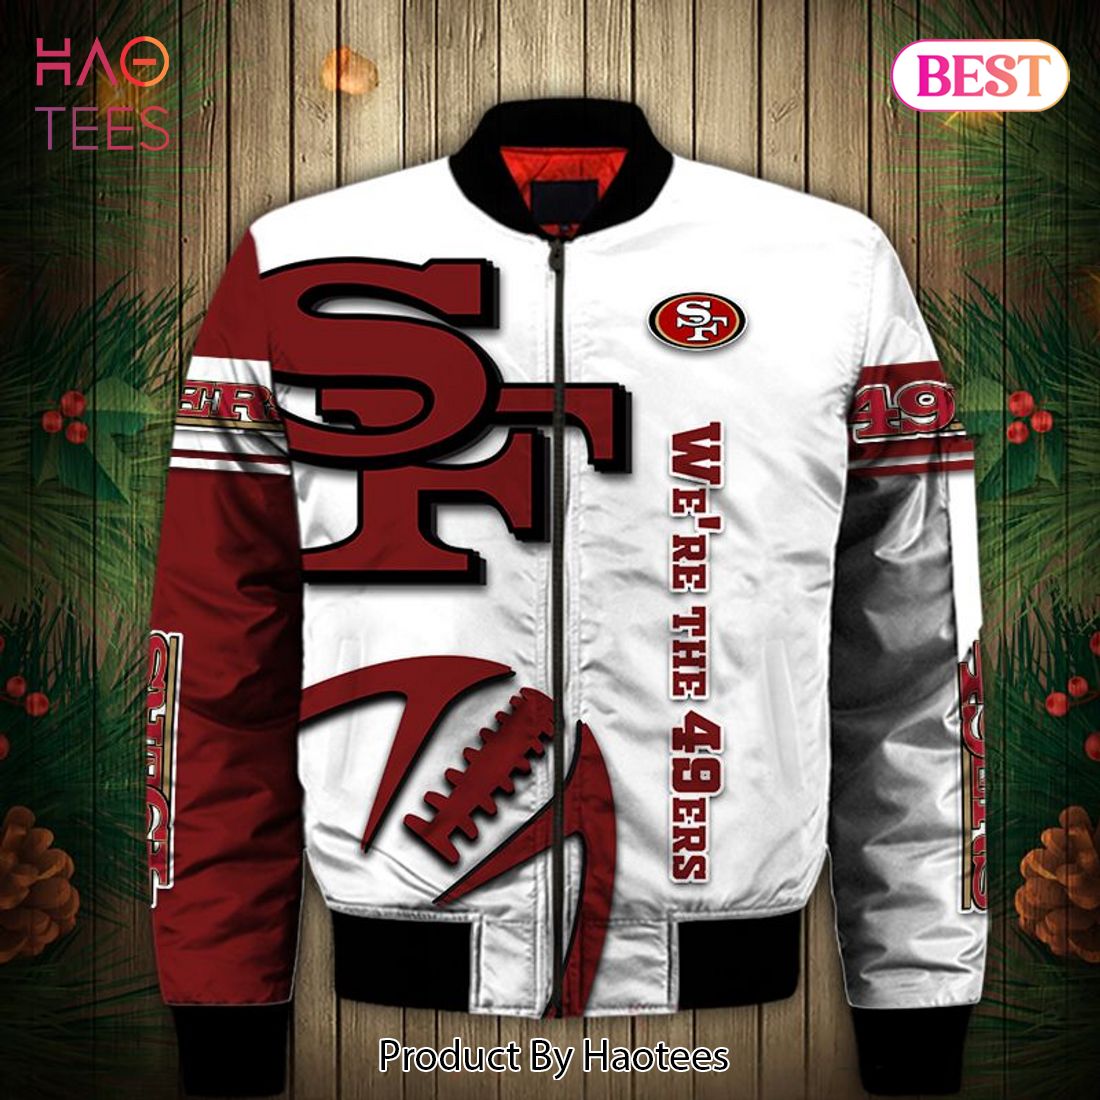 49ers bomber jacket red